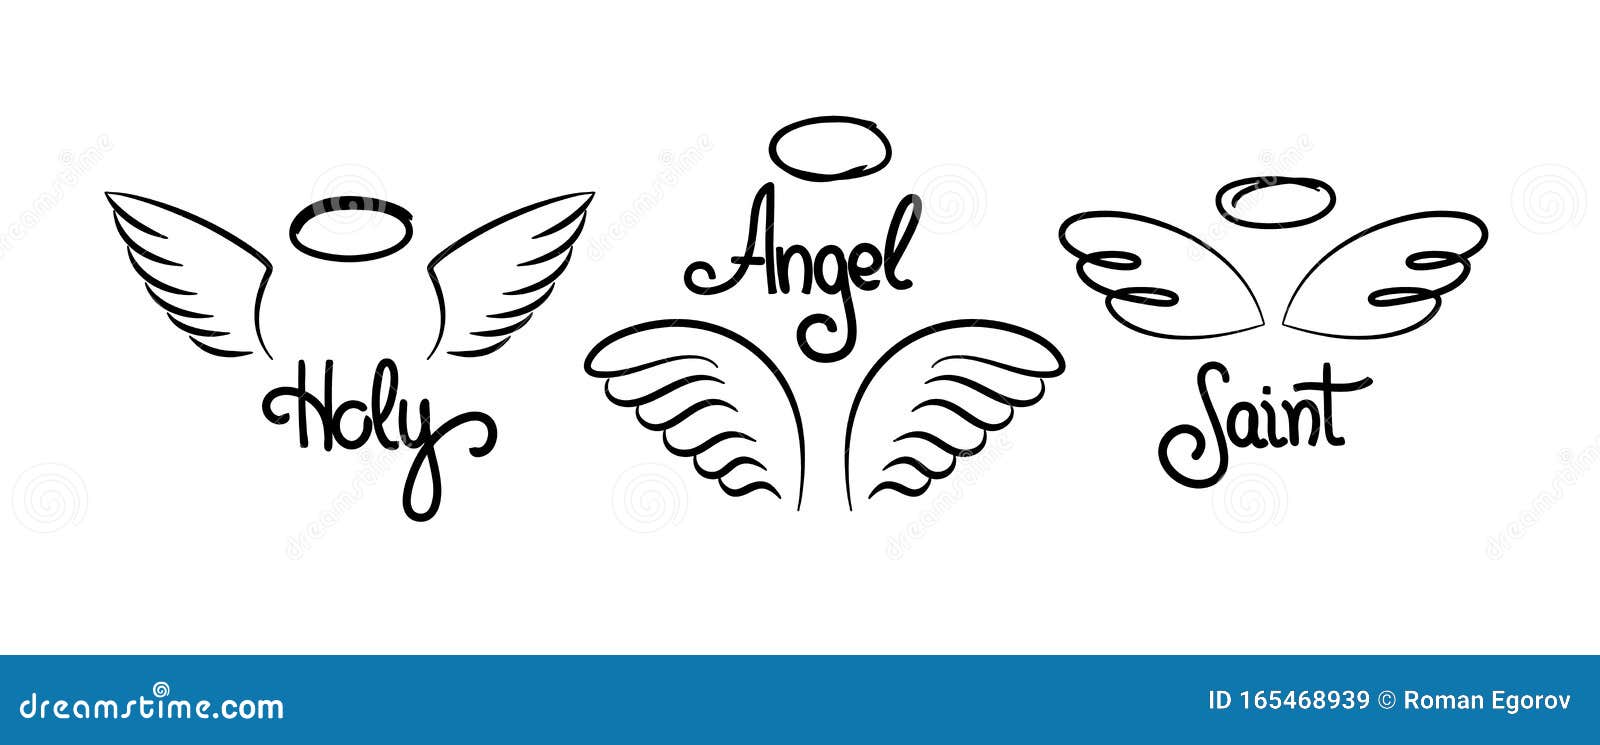 doodle wings logo. pair of hand drawn angel wings with decorative text and halo, heavenly religious emblems.  set